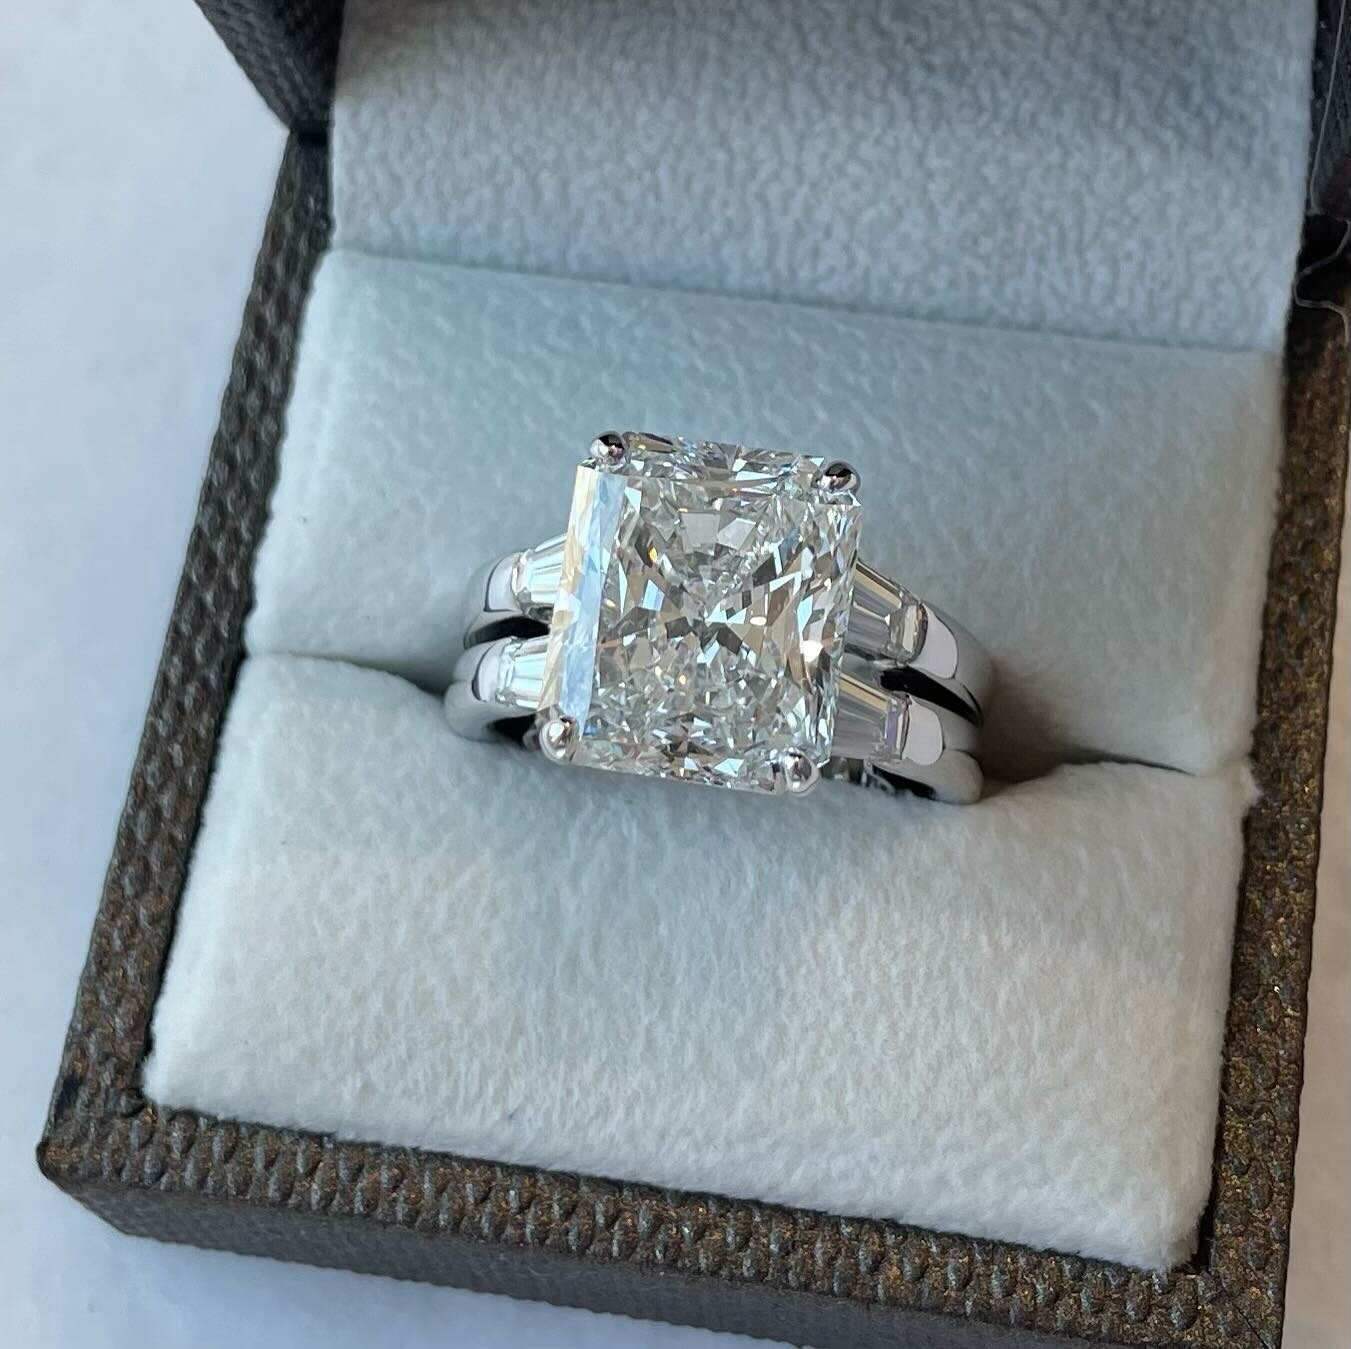 The pictures say it all!

8 1/2 Carat, GIA certified, natural earth mined radiant cut Diamond.

We source, design, and create - all in our Wayzata workshop and gallery.  Swipe to see behind the scenes, preparing to set this special diamond.